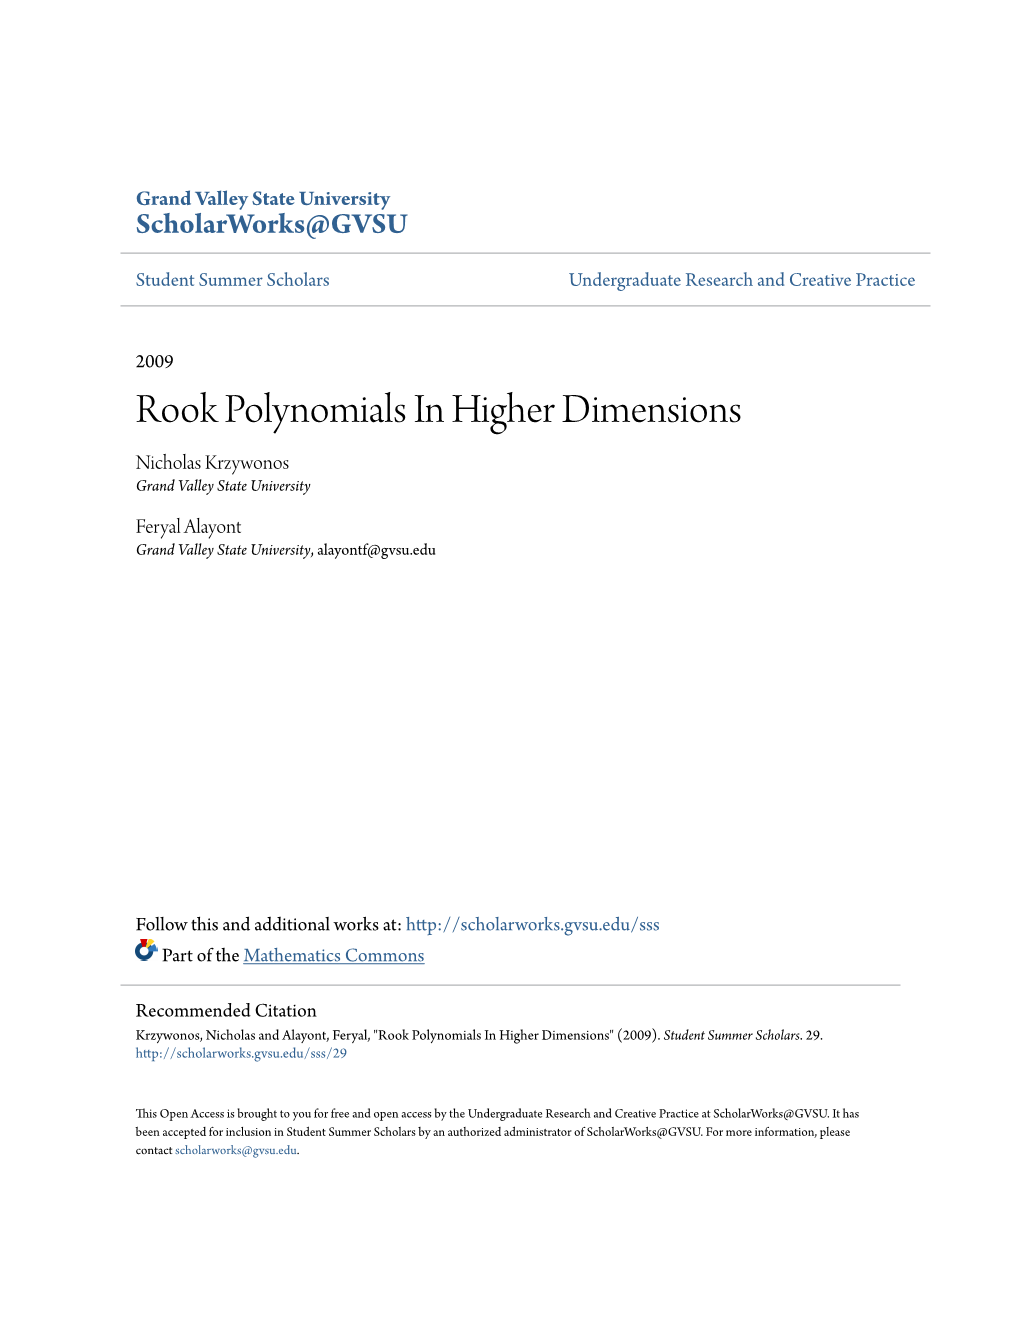 Rook Polynomials in Higher Dimensions Nicholas Krzywonos Grand Valley State University